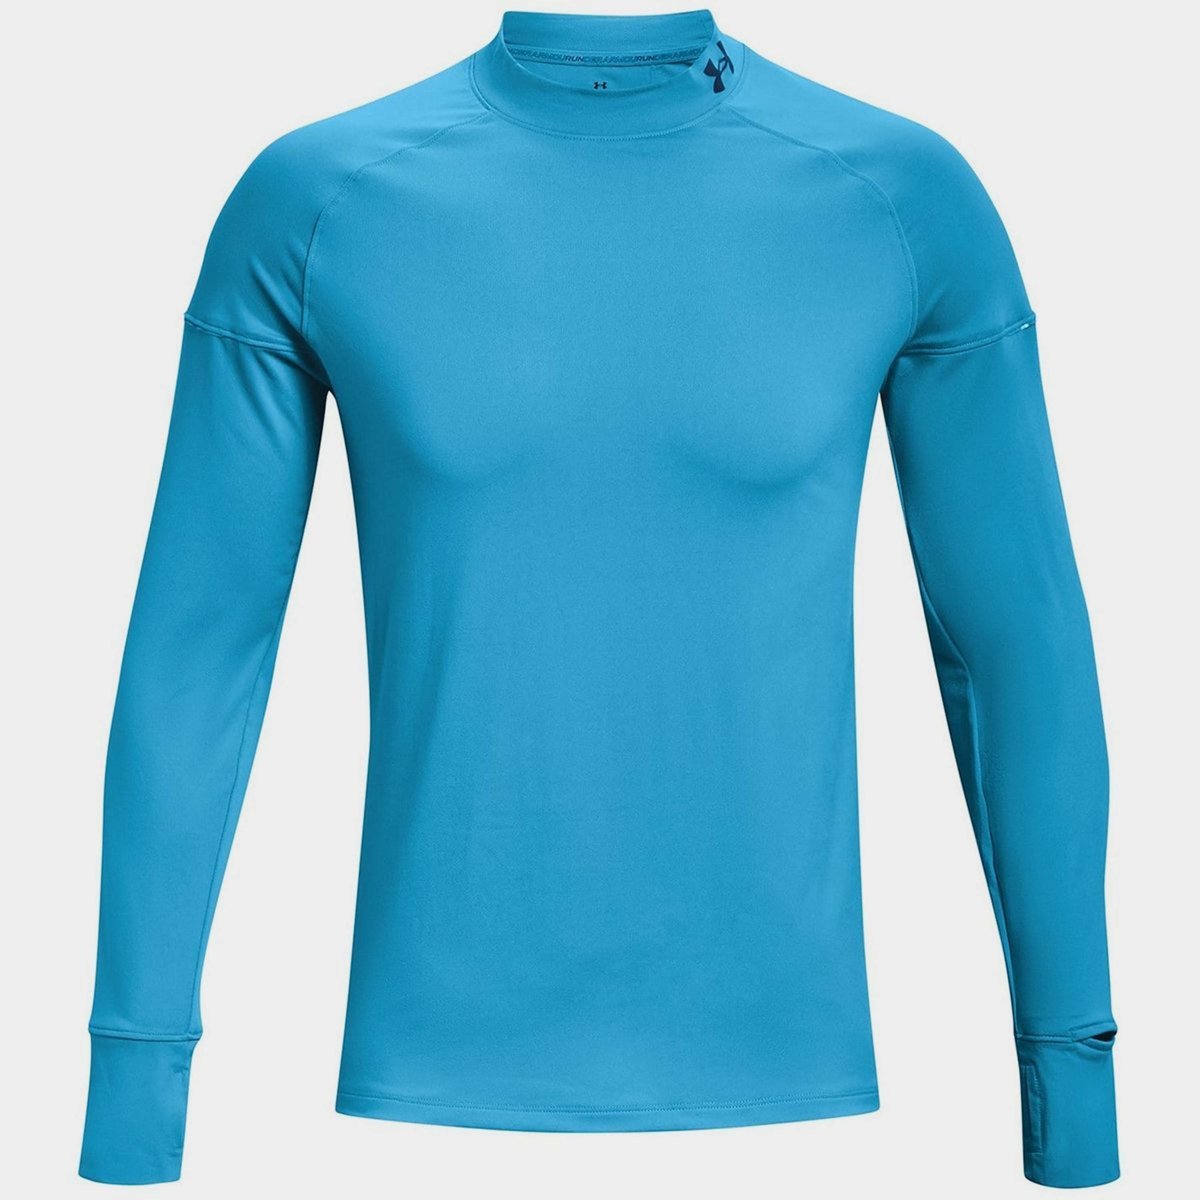 Under Armour Men's Qualifier Cold Long Sleeve –